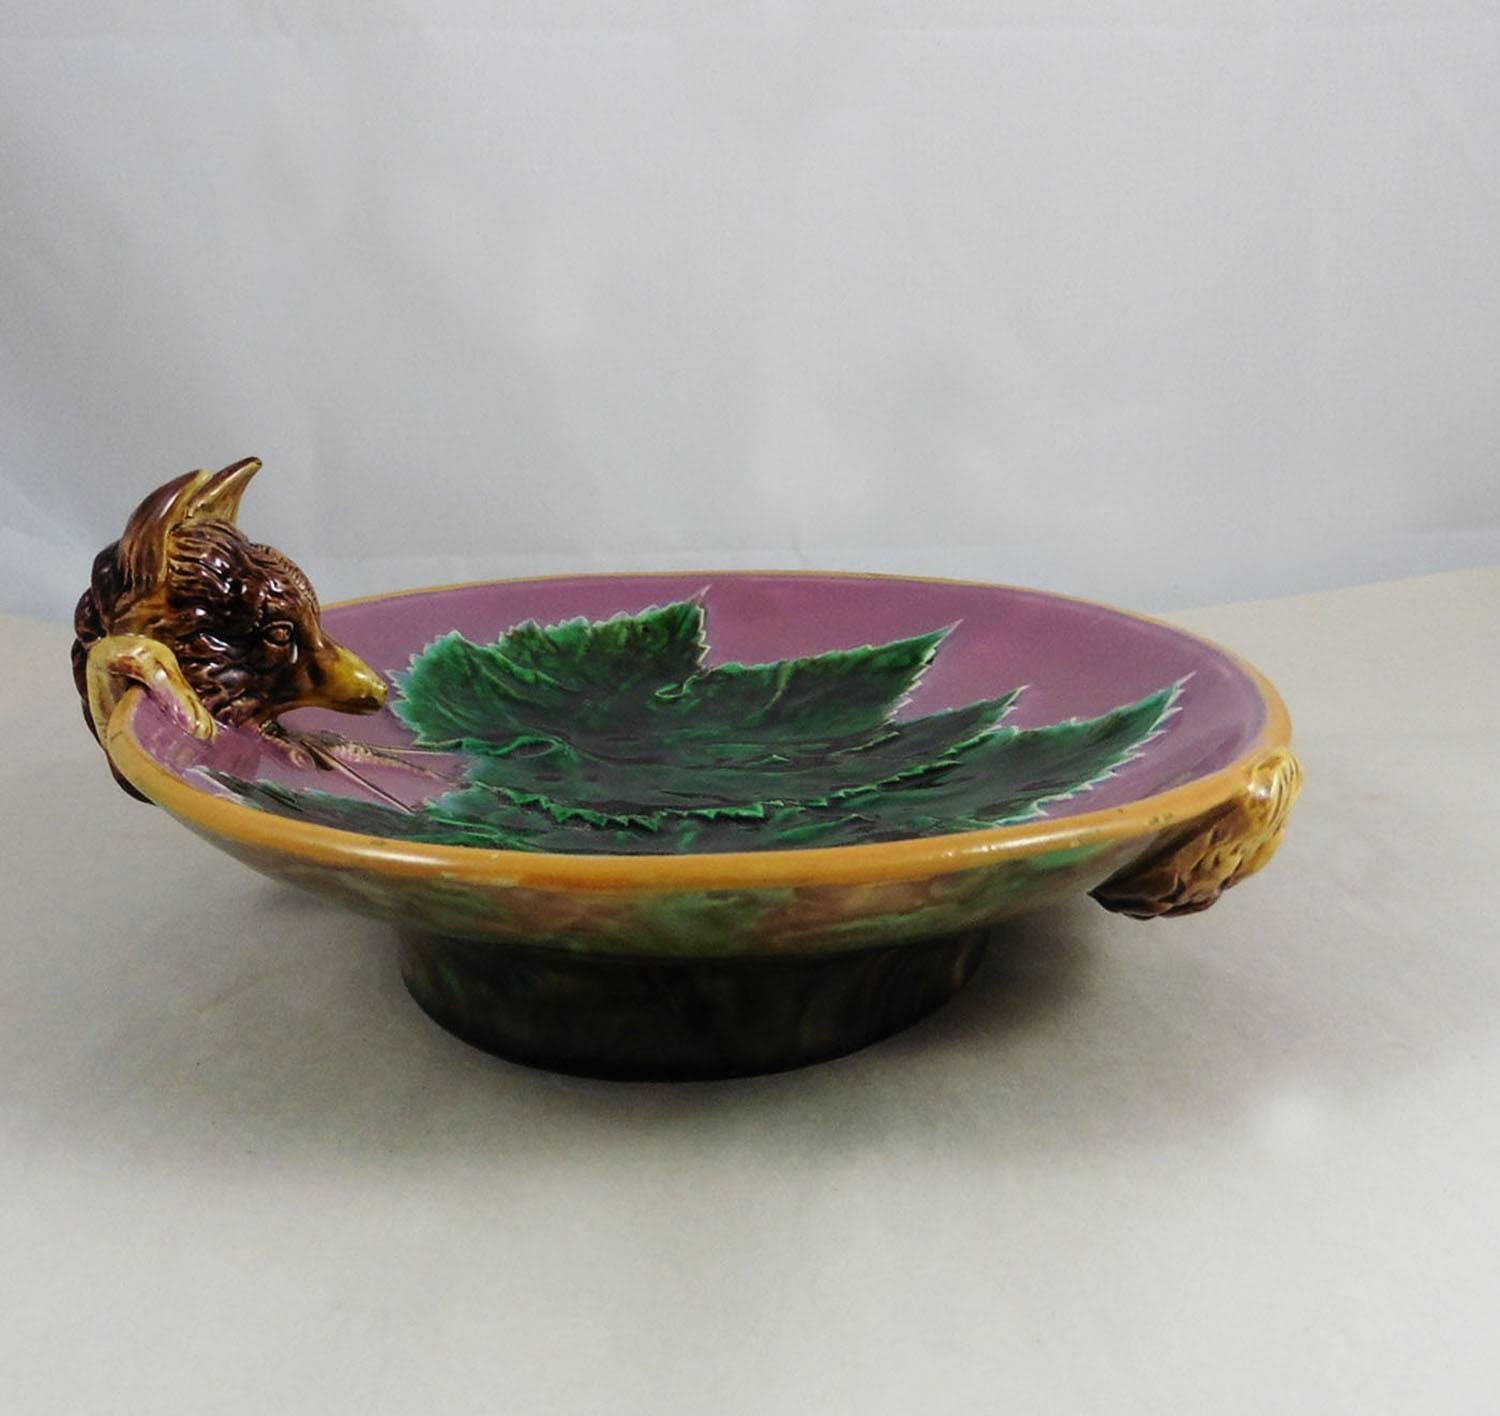 Elegant pink Majolica serving dish decorated with a three green vine leaves, the handle formed as a fox peering into the bowl with its tail appearing on the mottled underside signed George Jones and dated July 1869.
Nice example of the Naturalism in